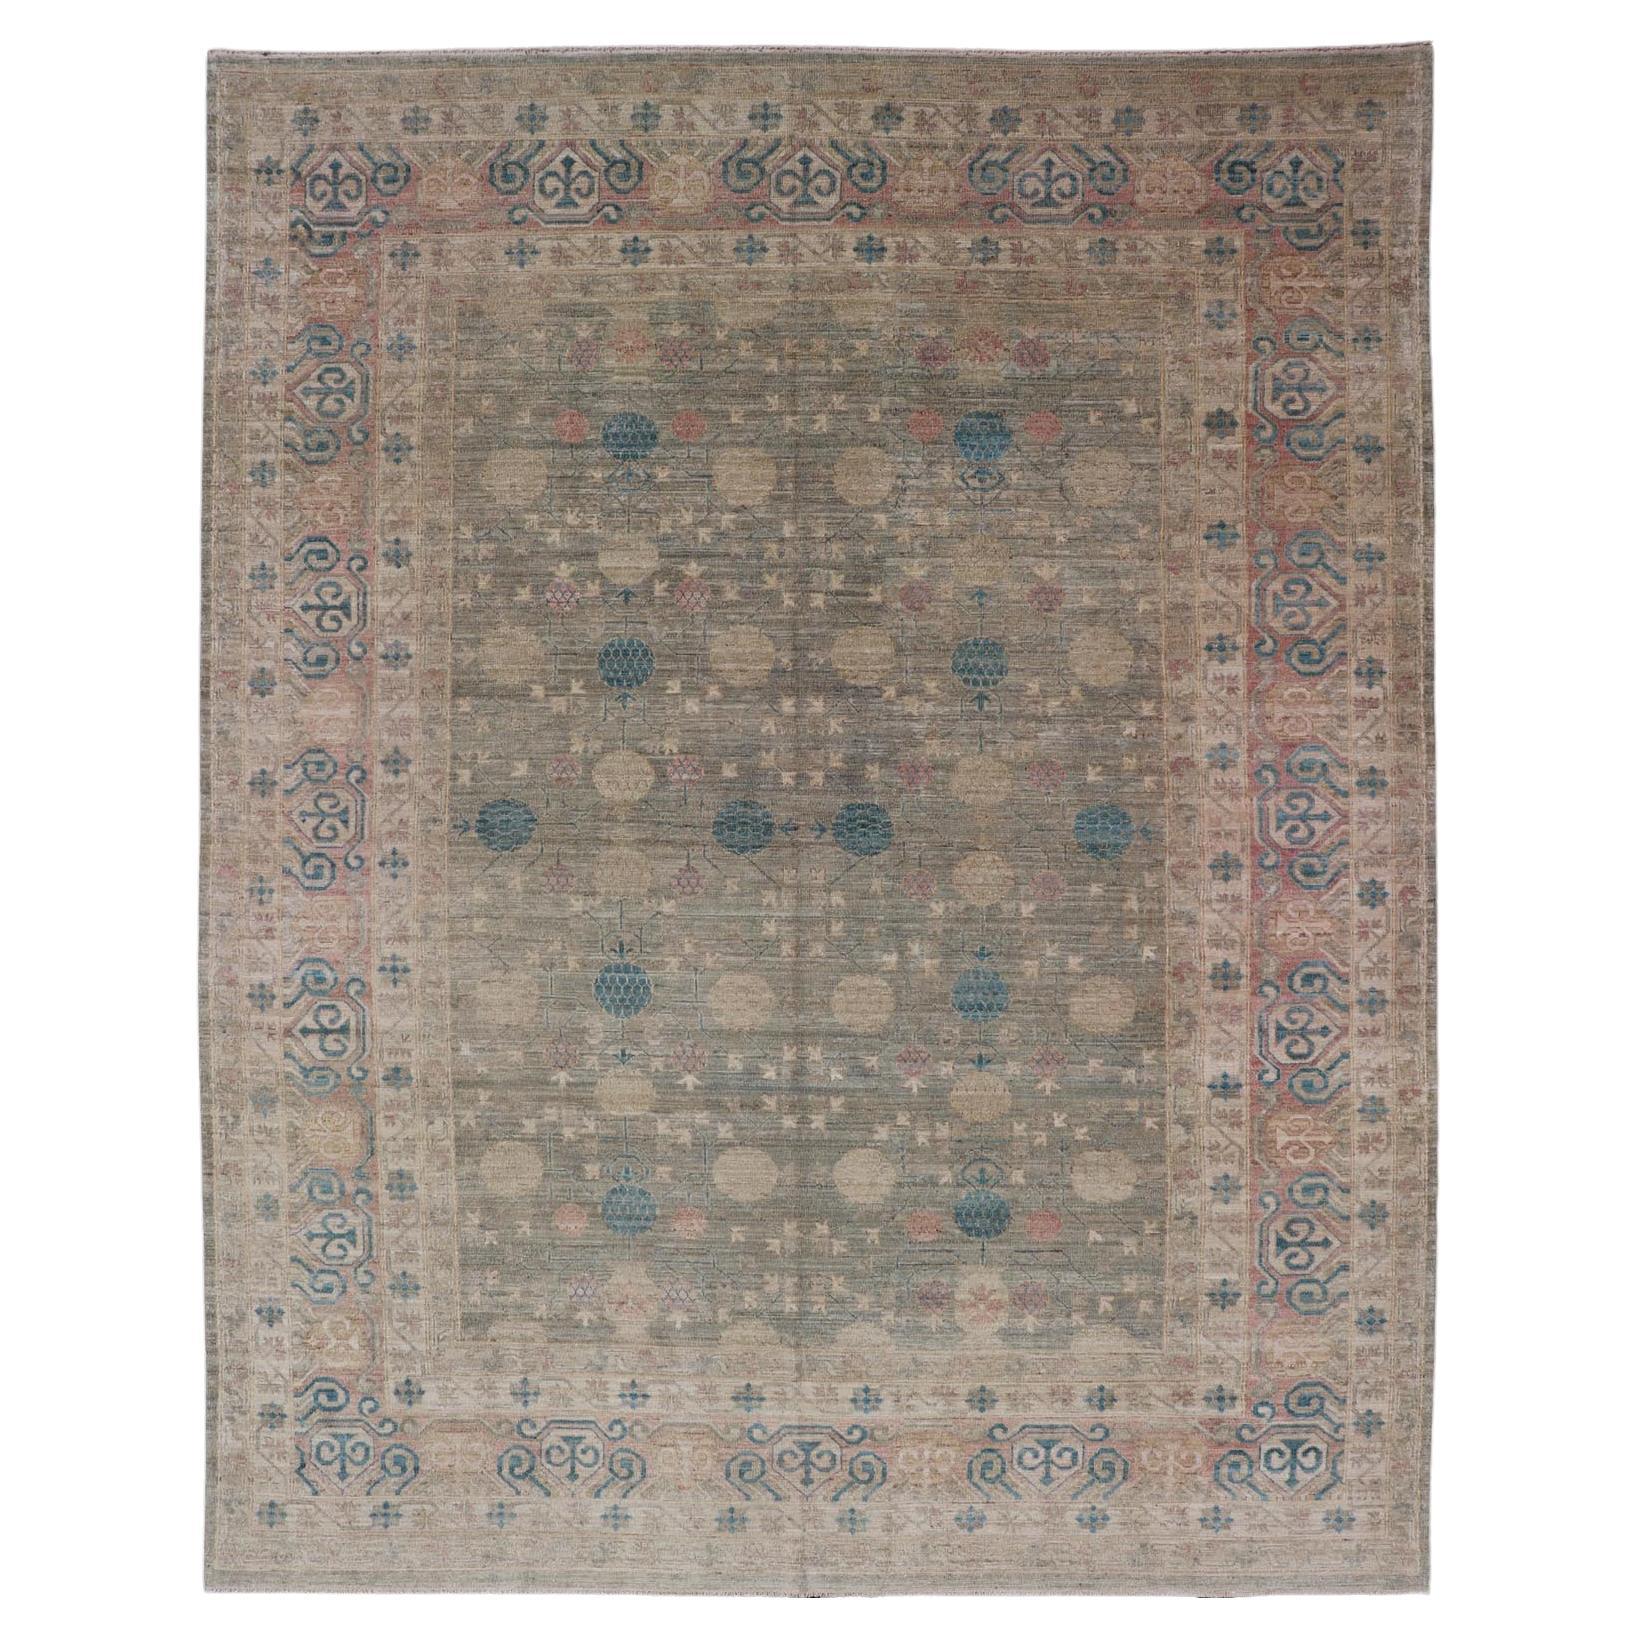 Large Modern Tribal Khotan Rug in Shades of Cream, Green, Blue, and Coral